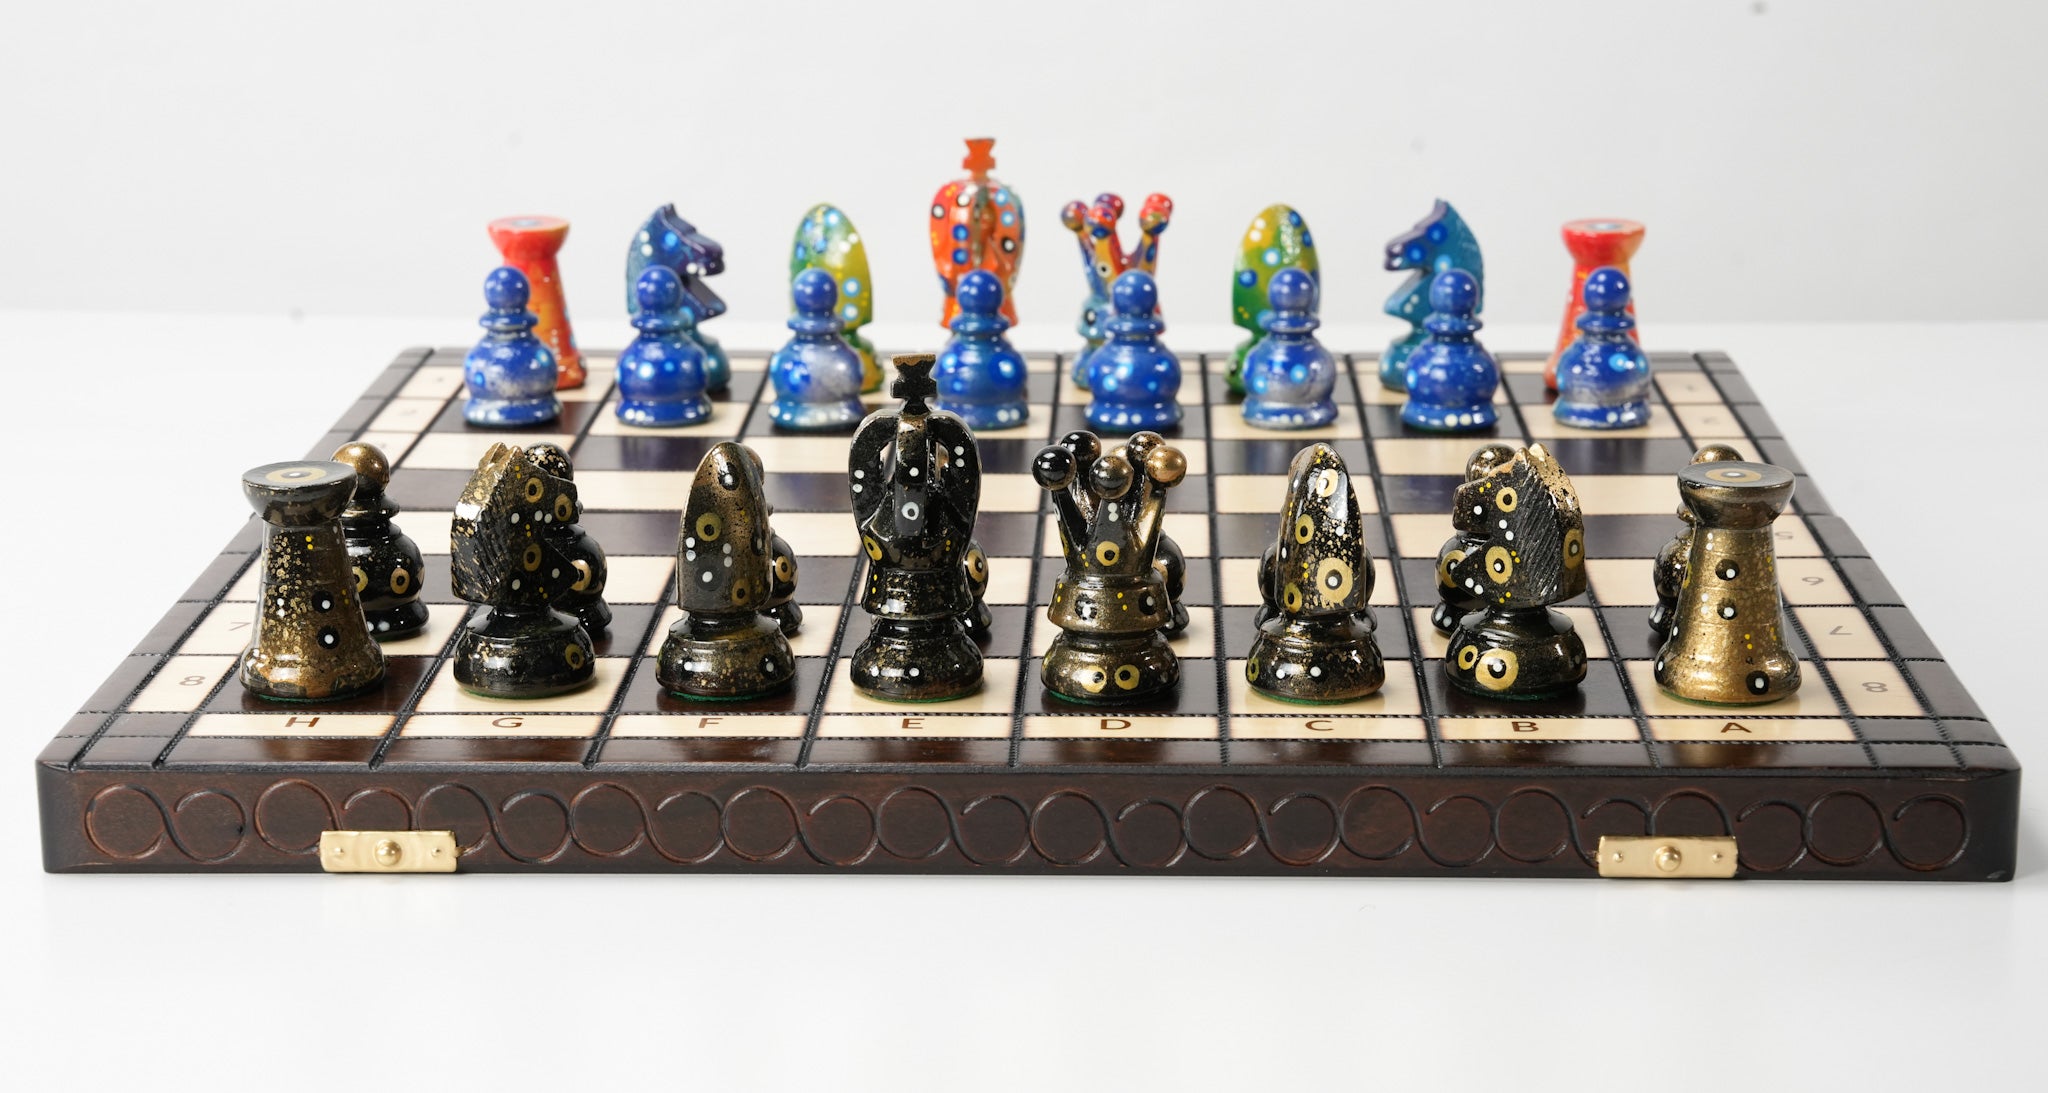 The Purist's Performance - Sydney Gruber Painted 17" Large Kings Chess Set #8 - Chess Set - Chess-House